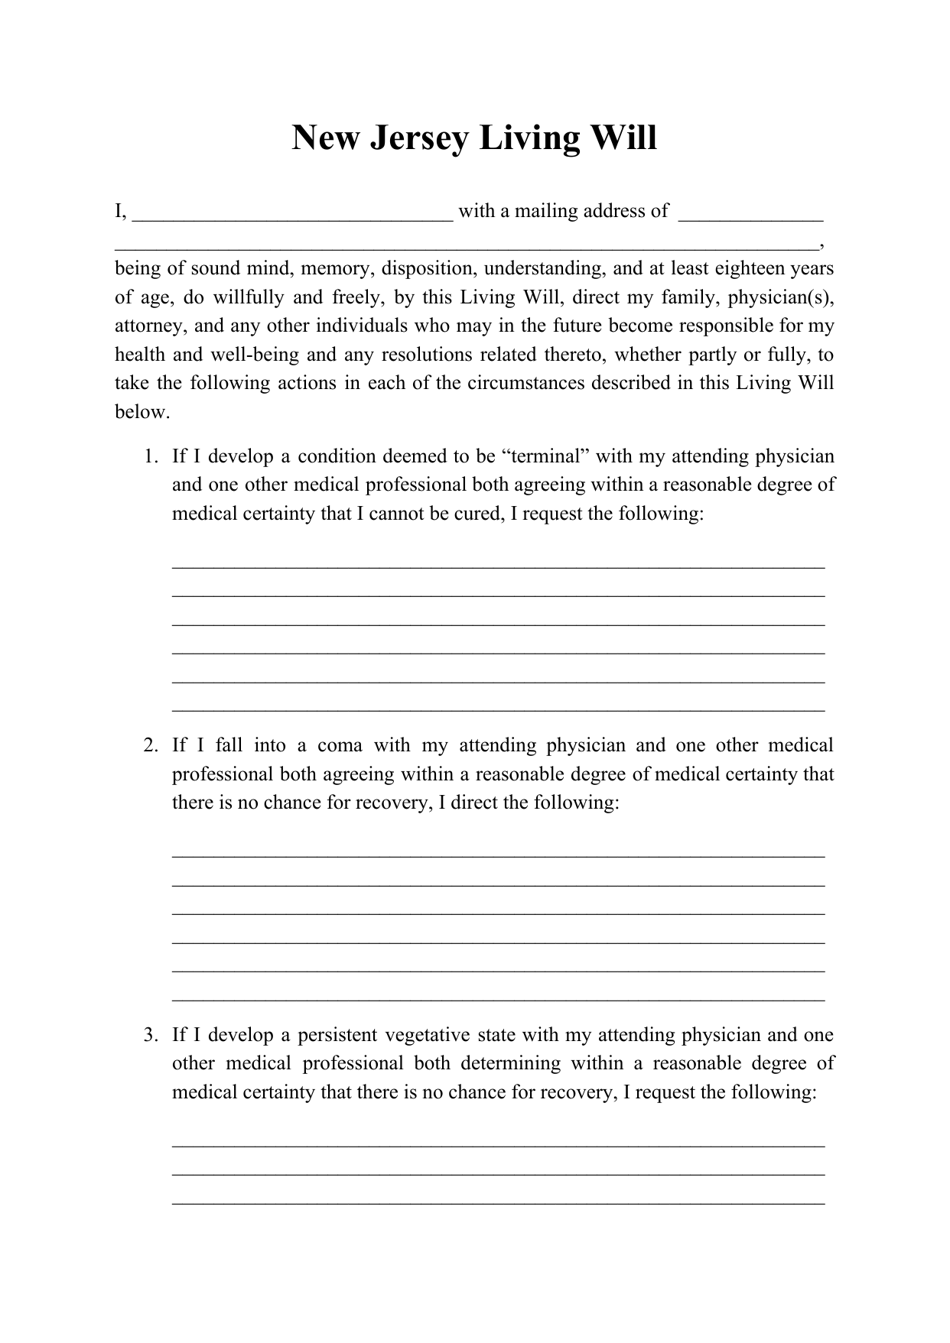 new-jersey-living-will-form-fill-out-sign-online-and-download-pdf